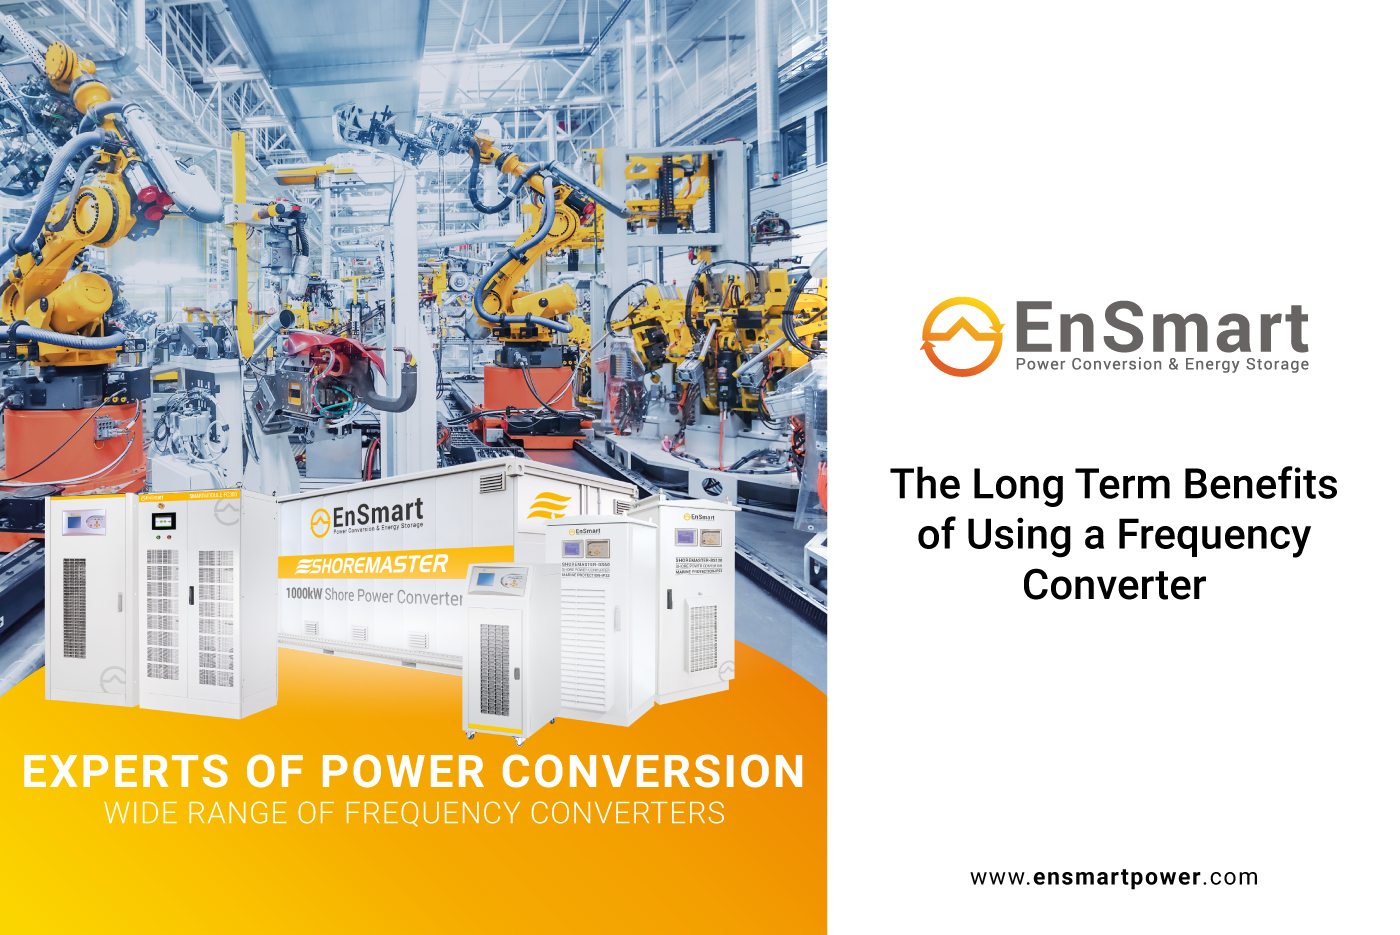 The Long Term Benefits of Using a Frequency Converter